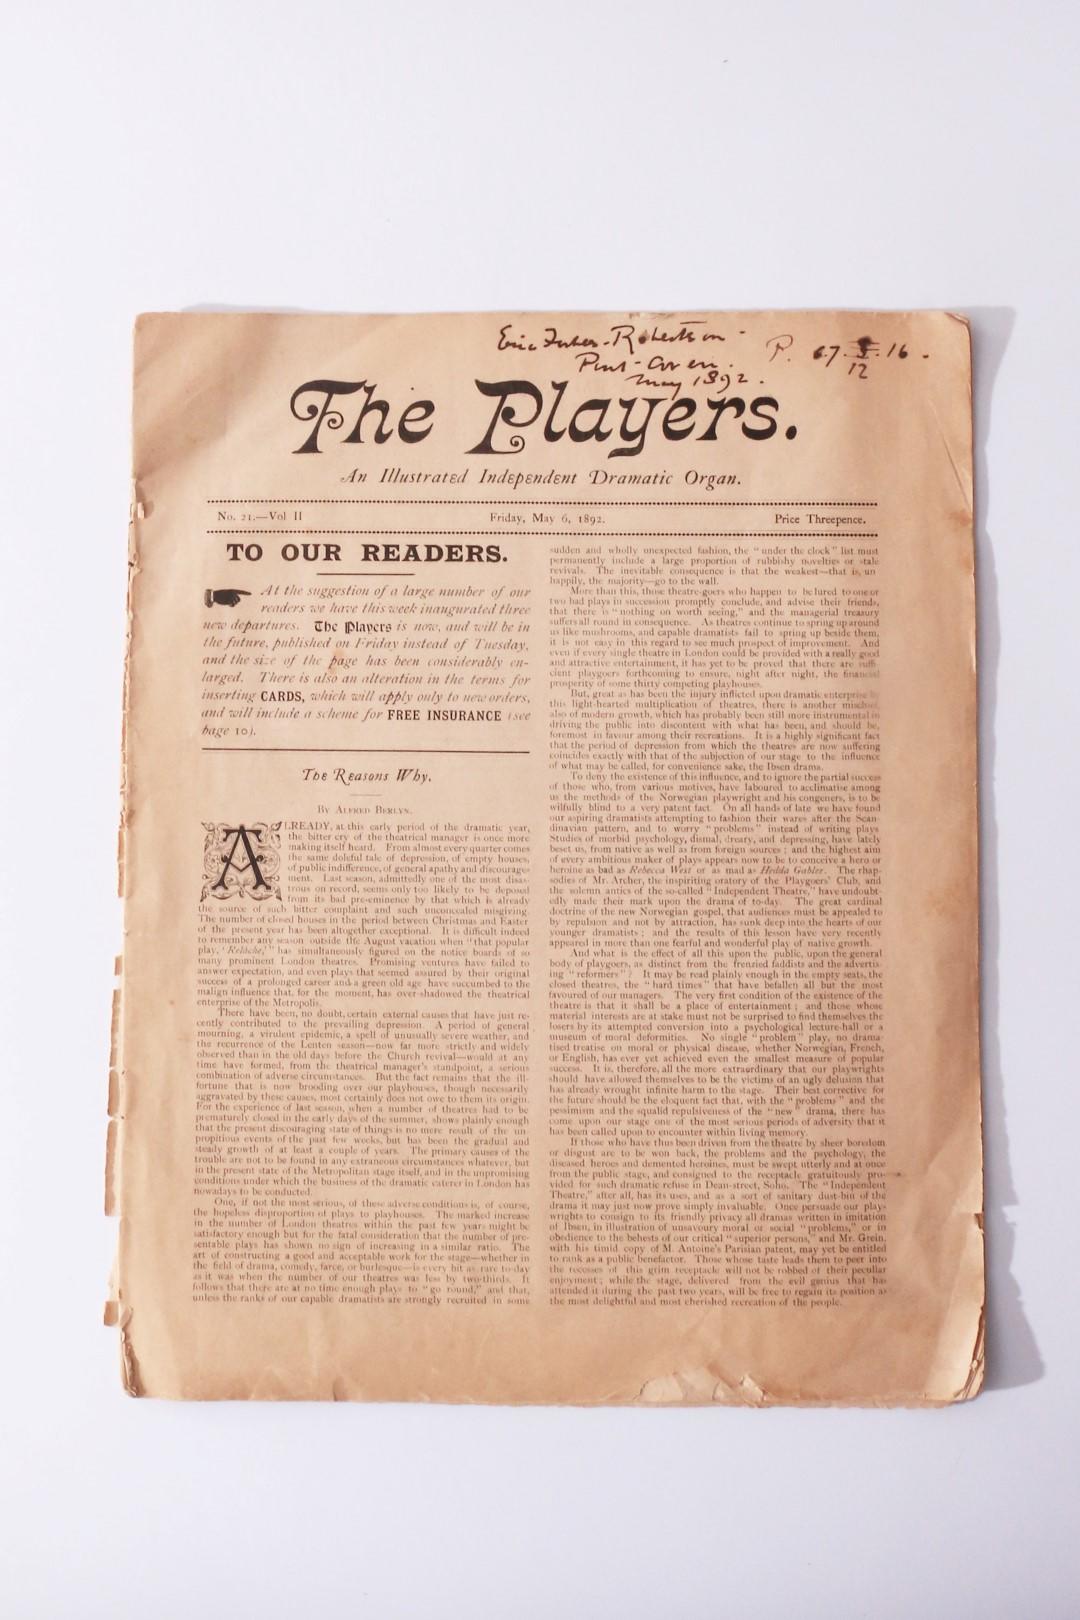 Various - The Players: An Illustrated Independent Dramatic Organ - #21, V11, May 6th 1892 - n.p., 1892, First Edition.